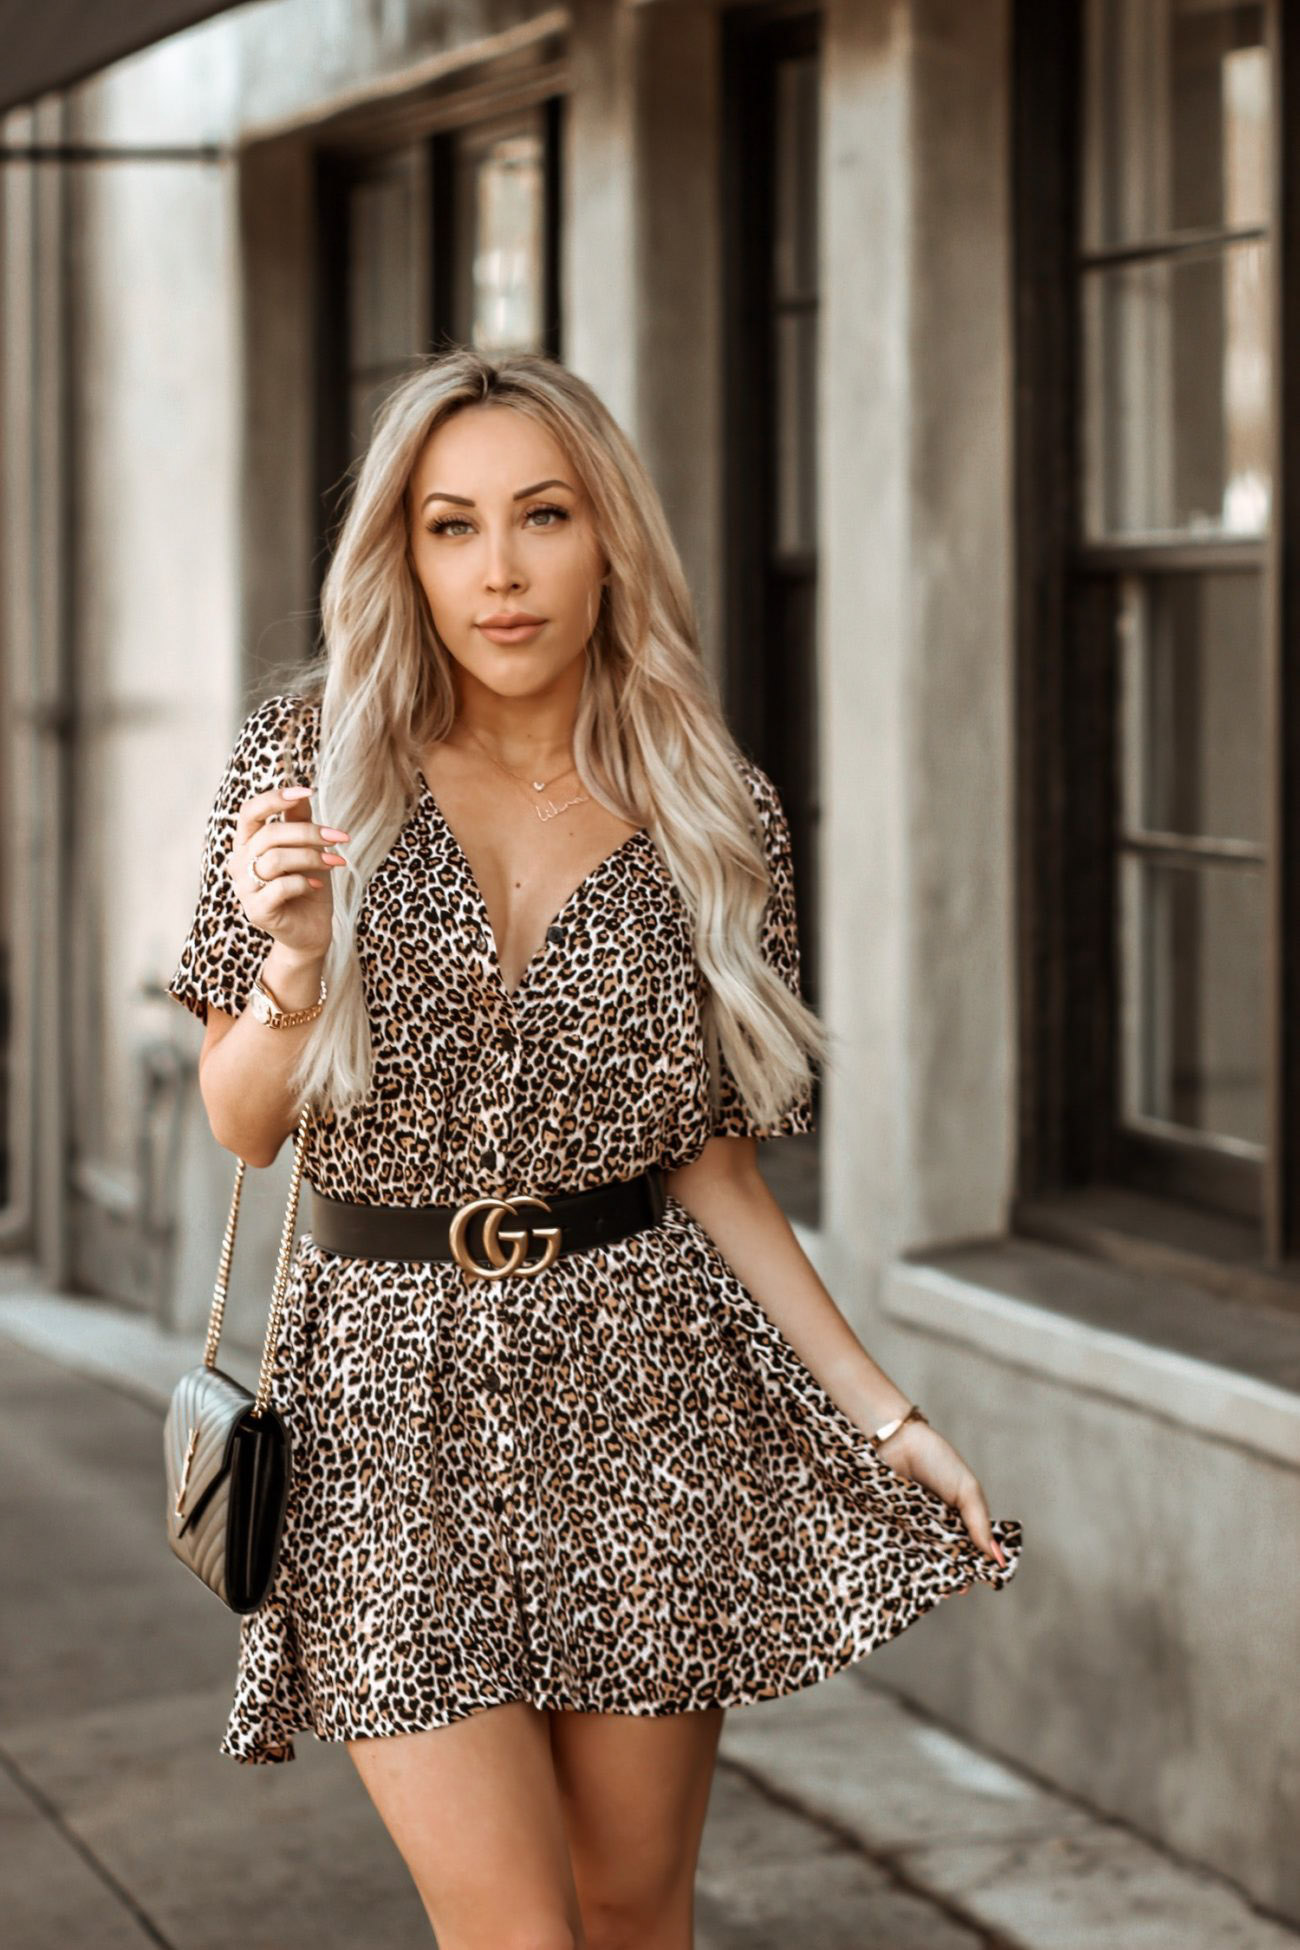 Leopard Button Up Flow Dress | Princess Polly Dress | Gucci Belt | Styling A Gucci Belt | YSL Bag | Blondie in the City by Hayley Larue